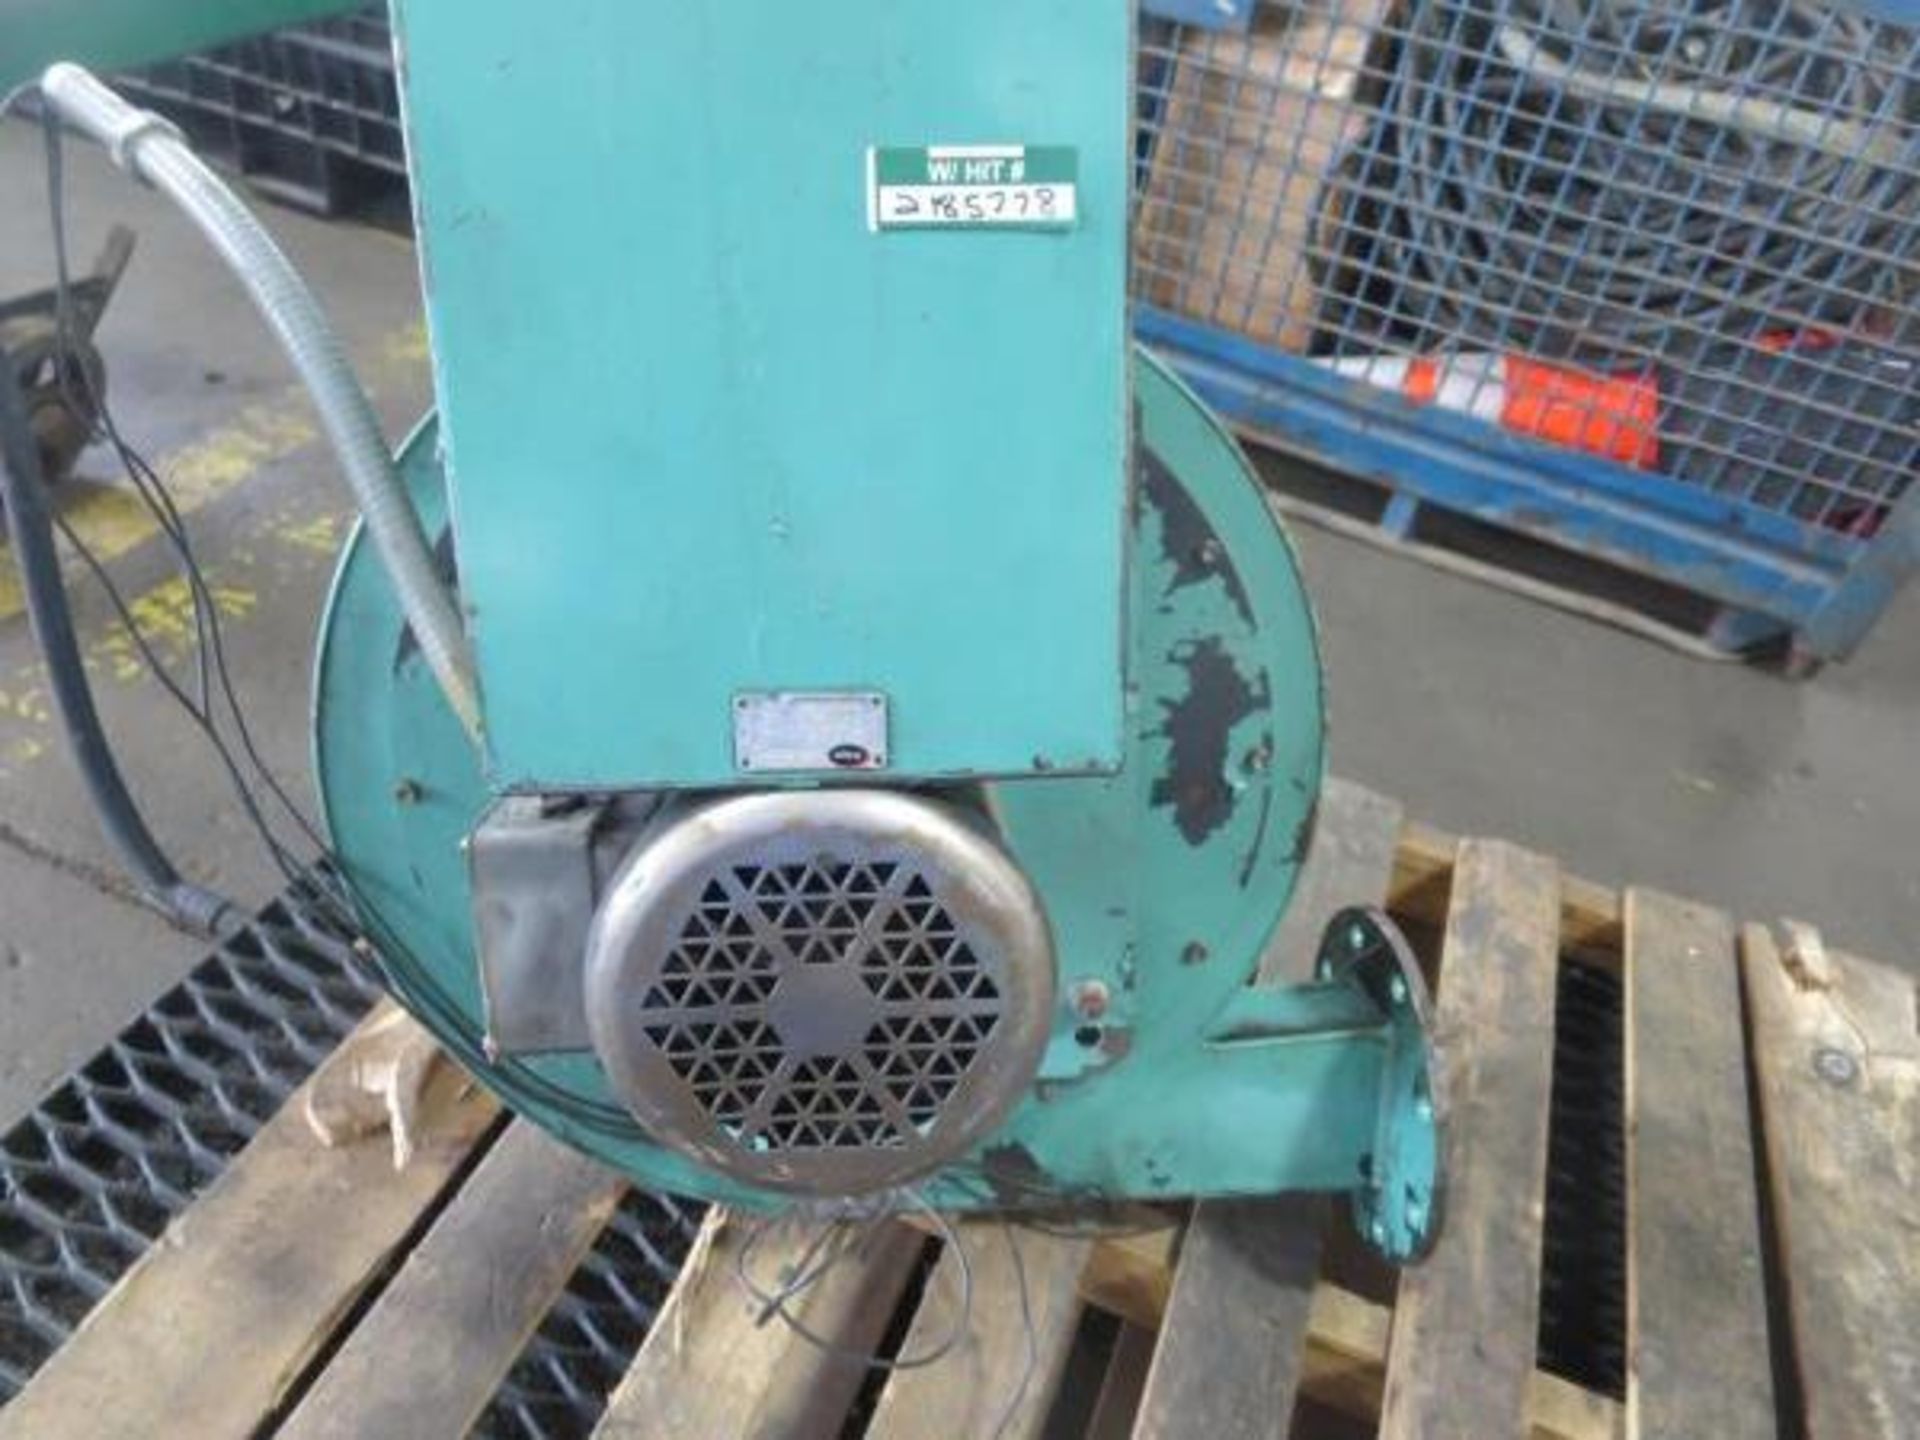 Battery Wash Stand, 54" x 44" with Eclipse SMJ Blower Hit # 2185778. M8-M9. Asset Located at 1425 - Bild 2 aus 3